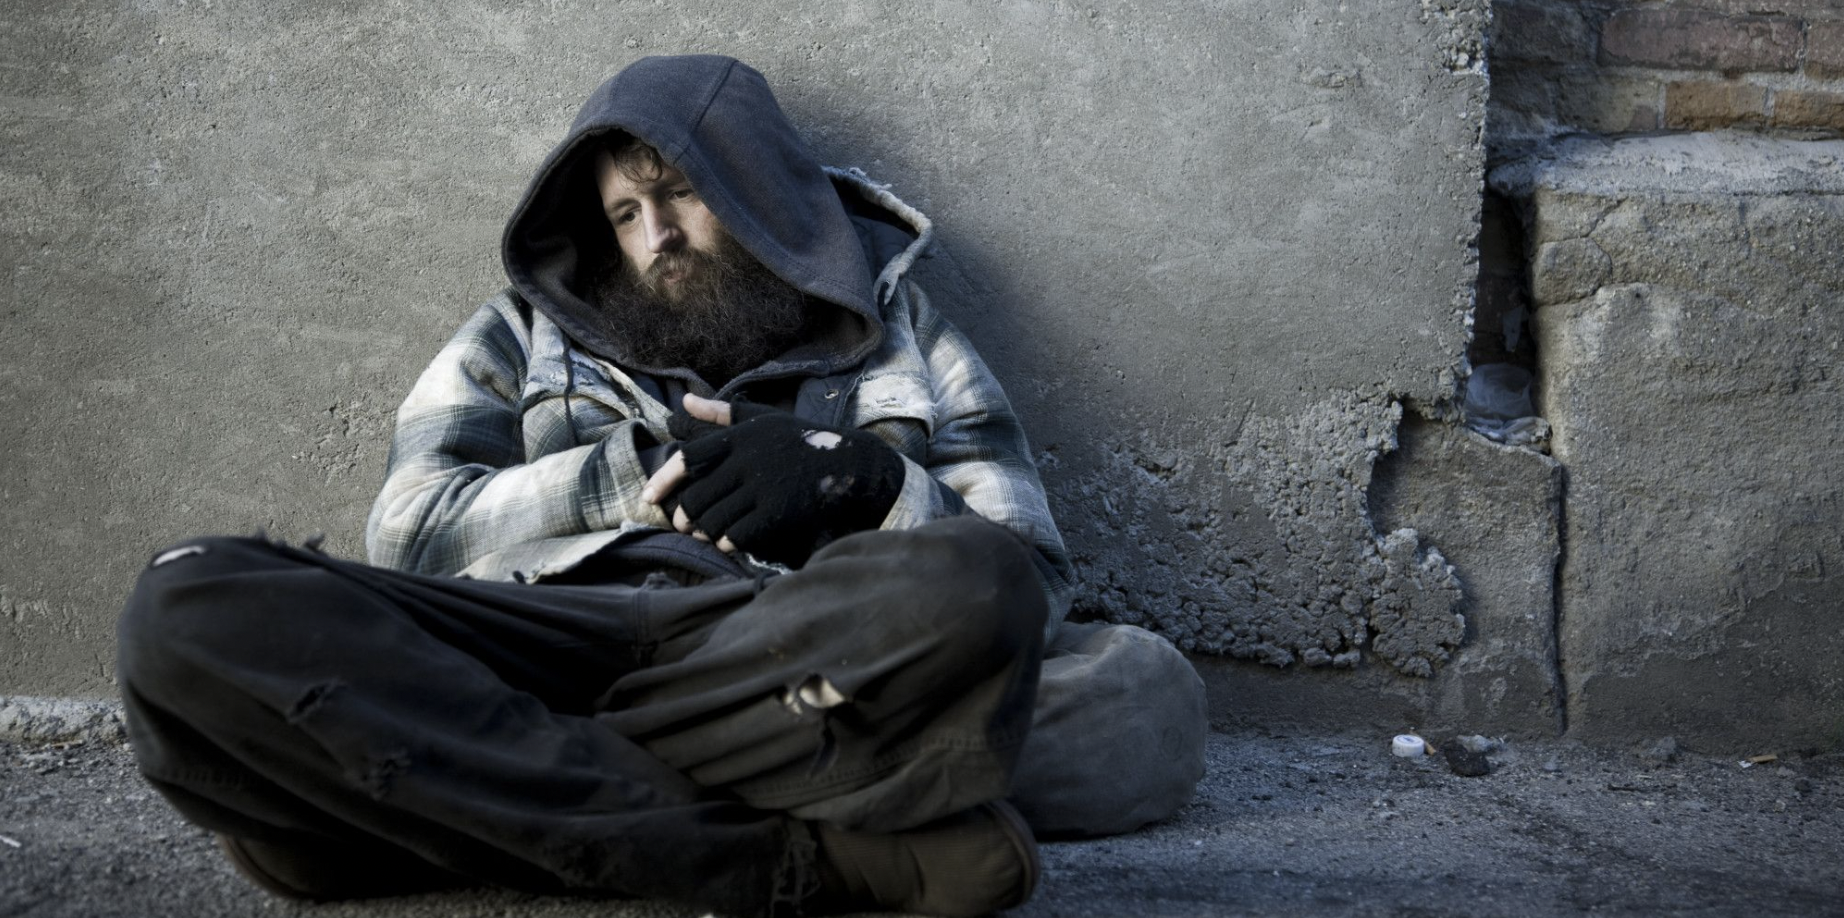 A beggar | Source: Getty Images